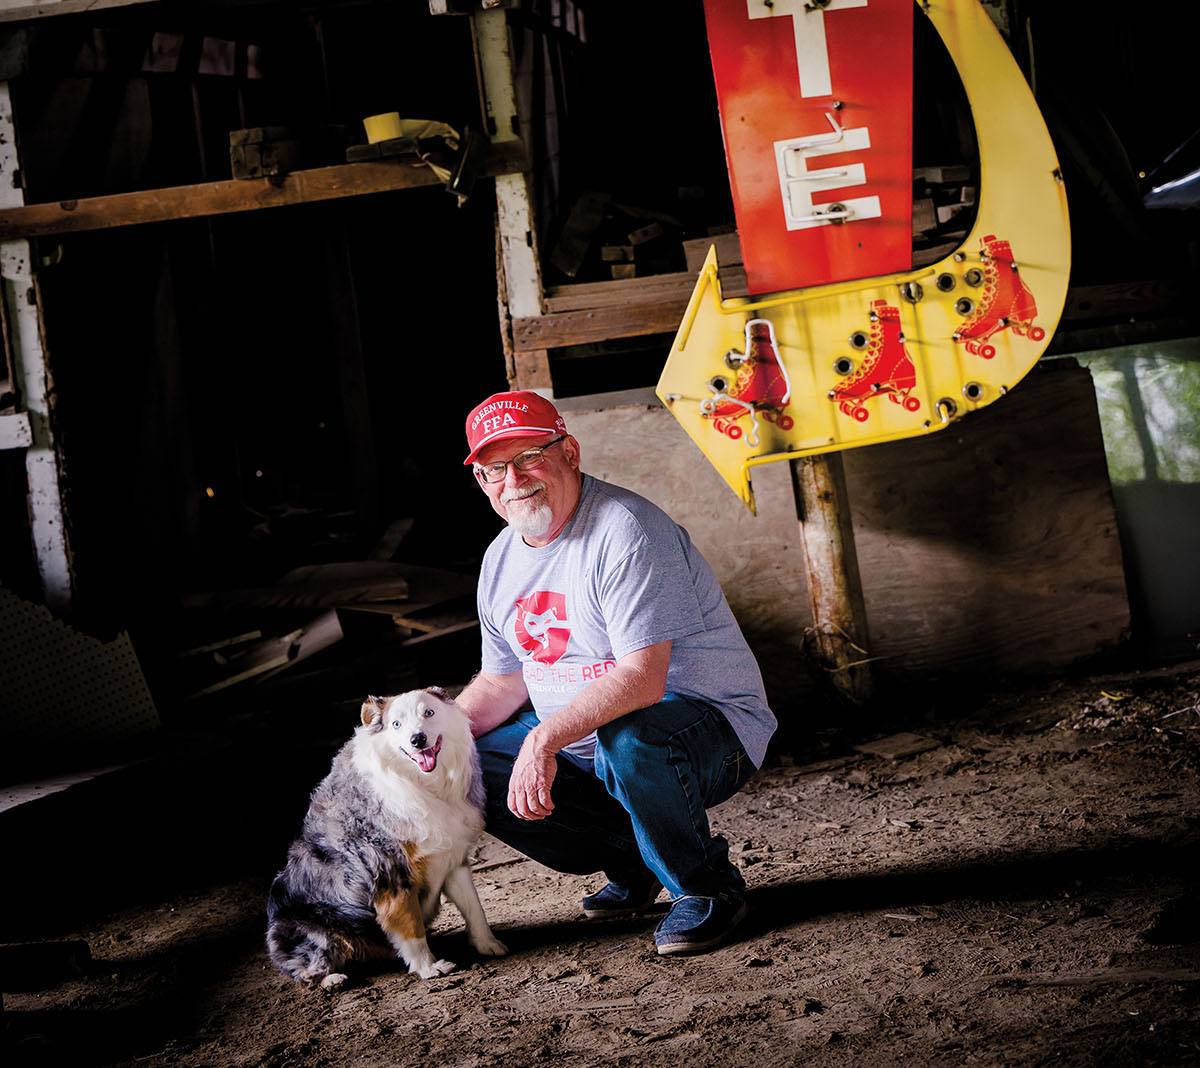 A man leans down to pet a dog beneath a bright yellow and red sign with arrows